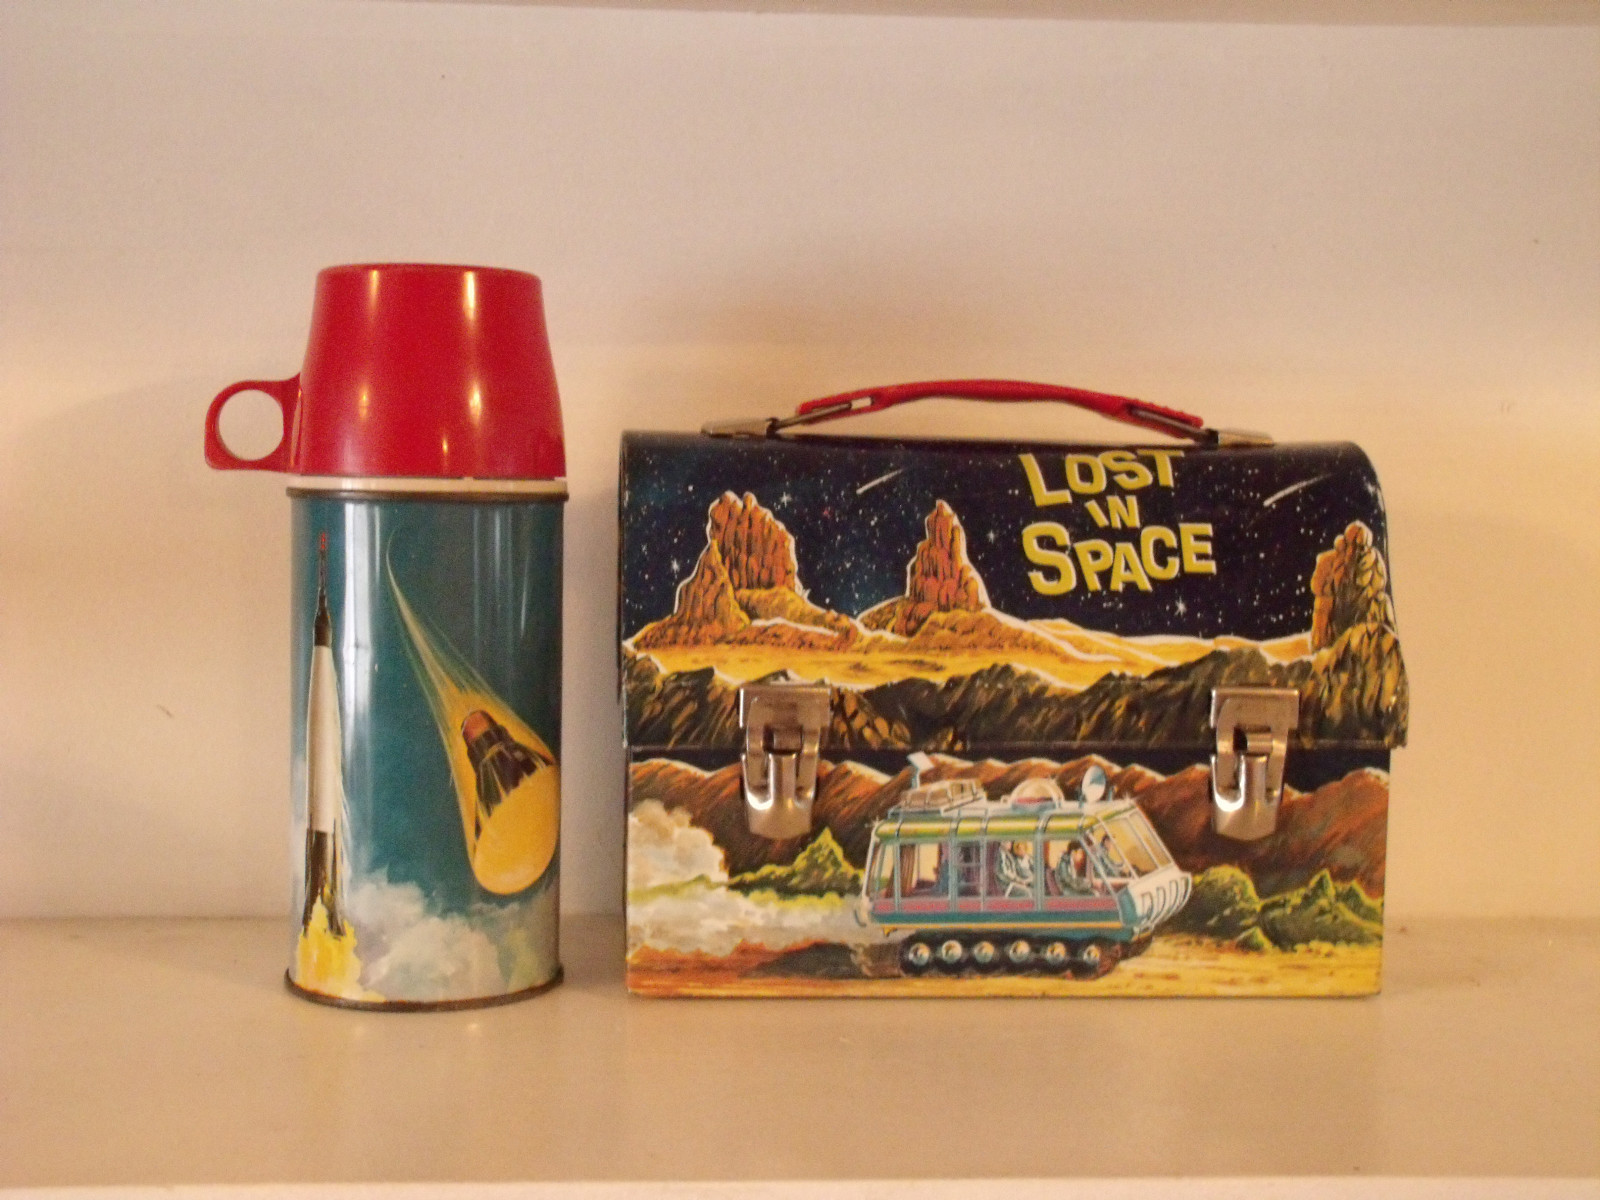 http://www.greatestcollectibles.com/wp-content/uploads/2012/05/1967-Lost-in-Space.jpg